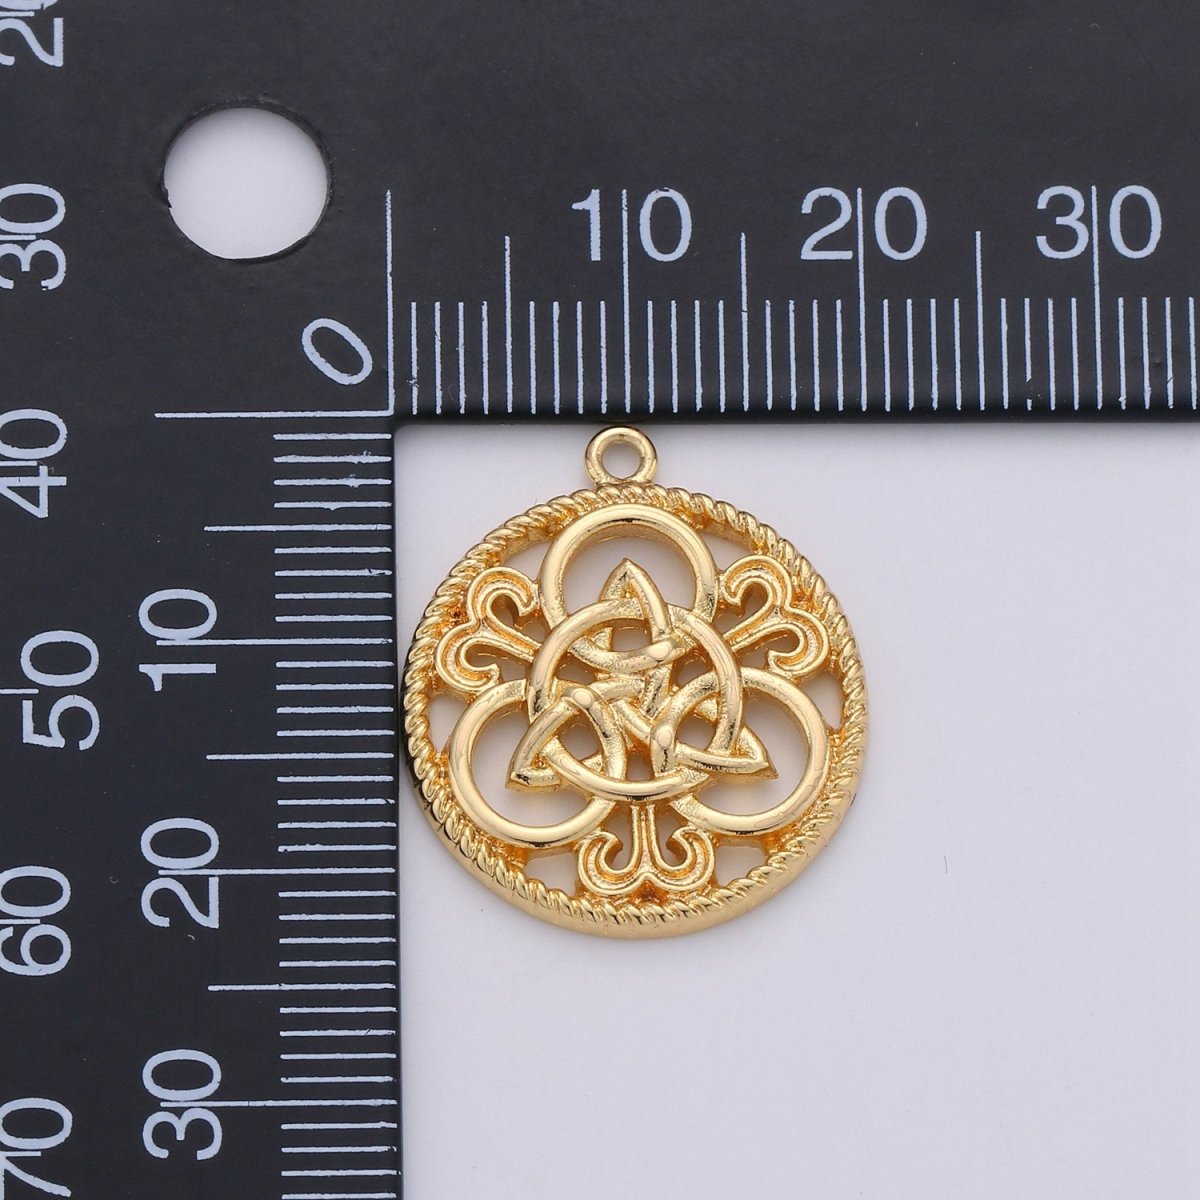 24K Gold Filled Rustic Geometric Flower Pattern Mosaic Charm for Necklace or Bracelet, C-889 - DLUXCA